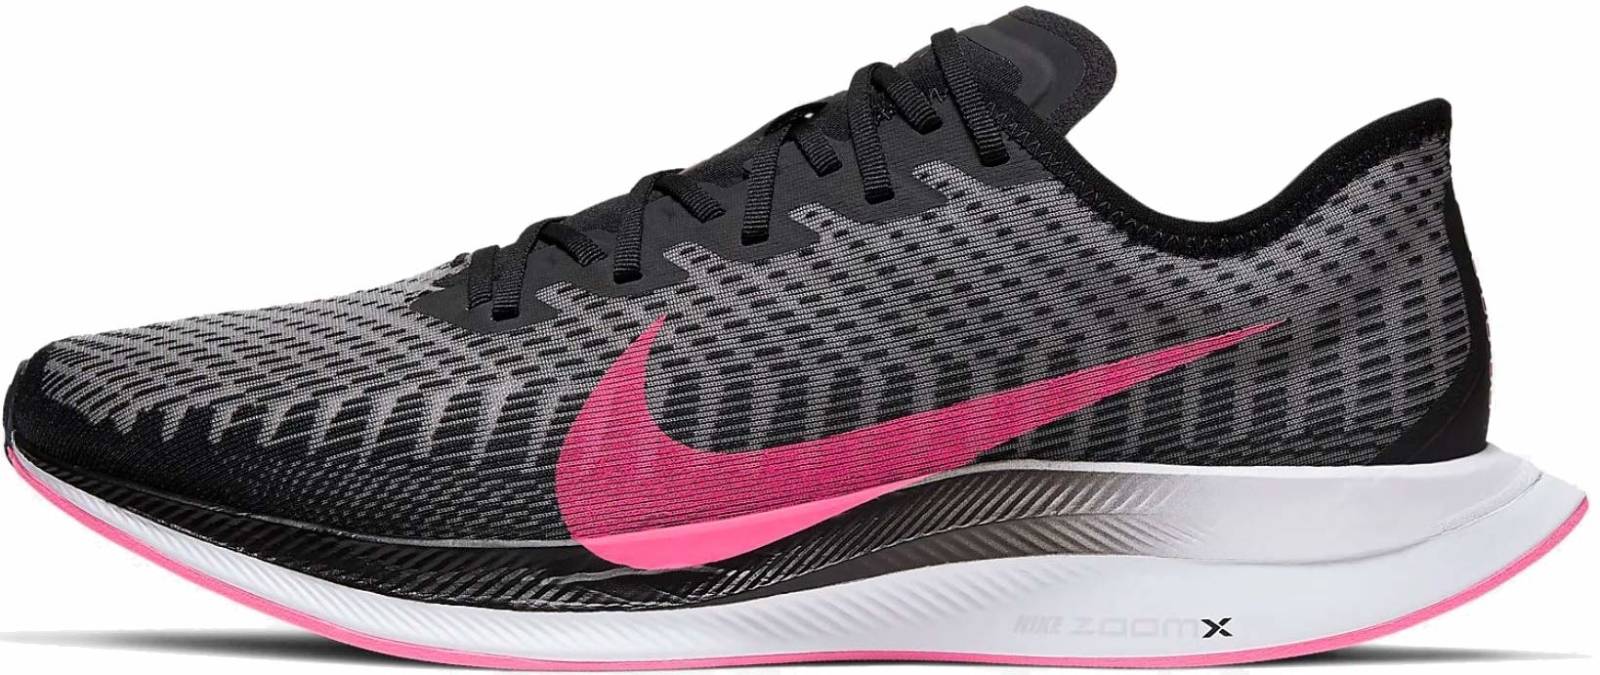 Nike Zoom Pegasus Turbo 2 - Review 2021 - Facts, Deals ($135 ...